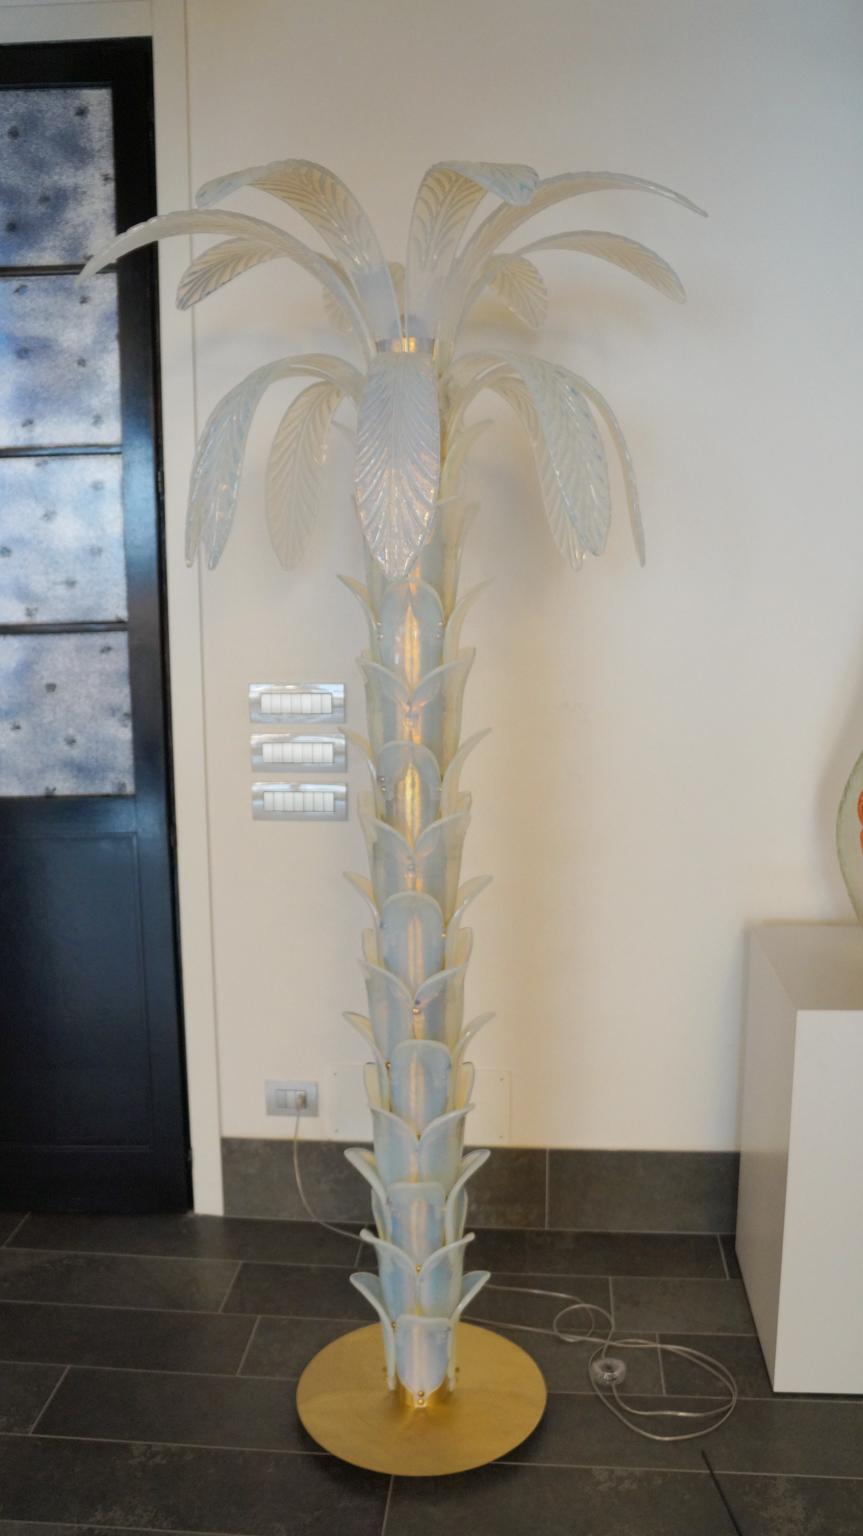 Attributed to Barovier, Opaline Palm Two Murano Glass Floor Lamps, 1990s For Sale 2